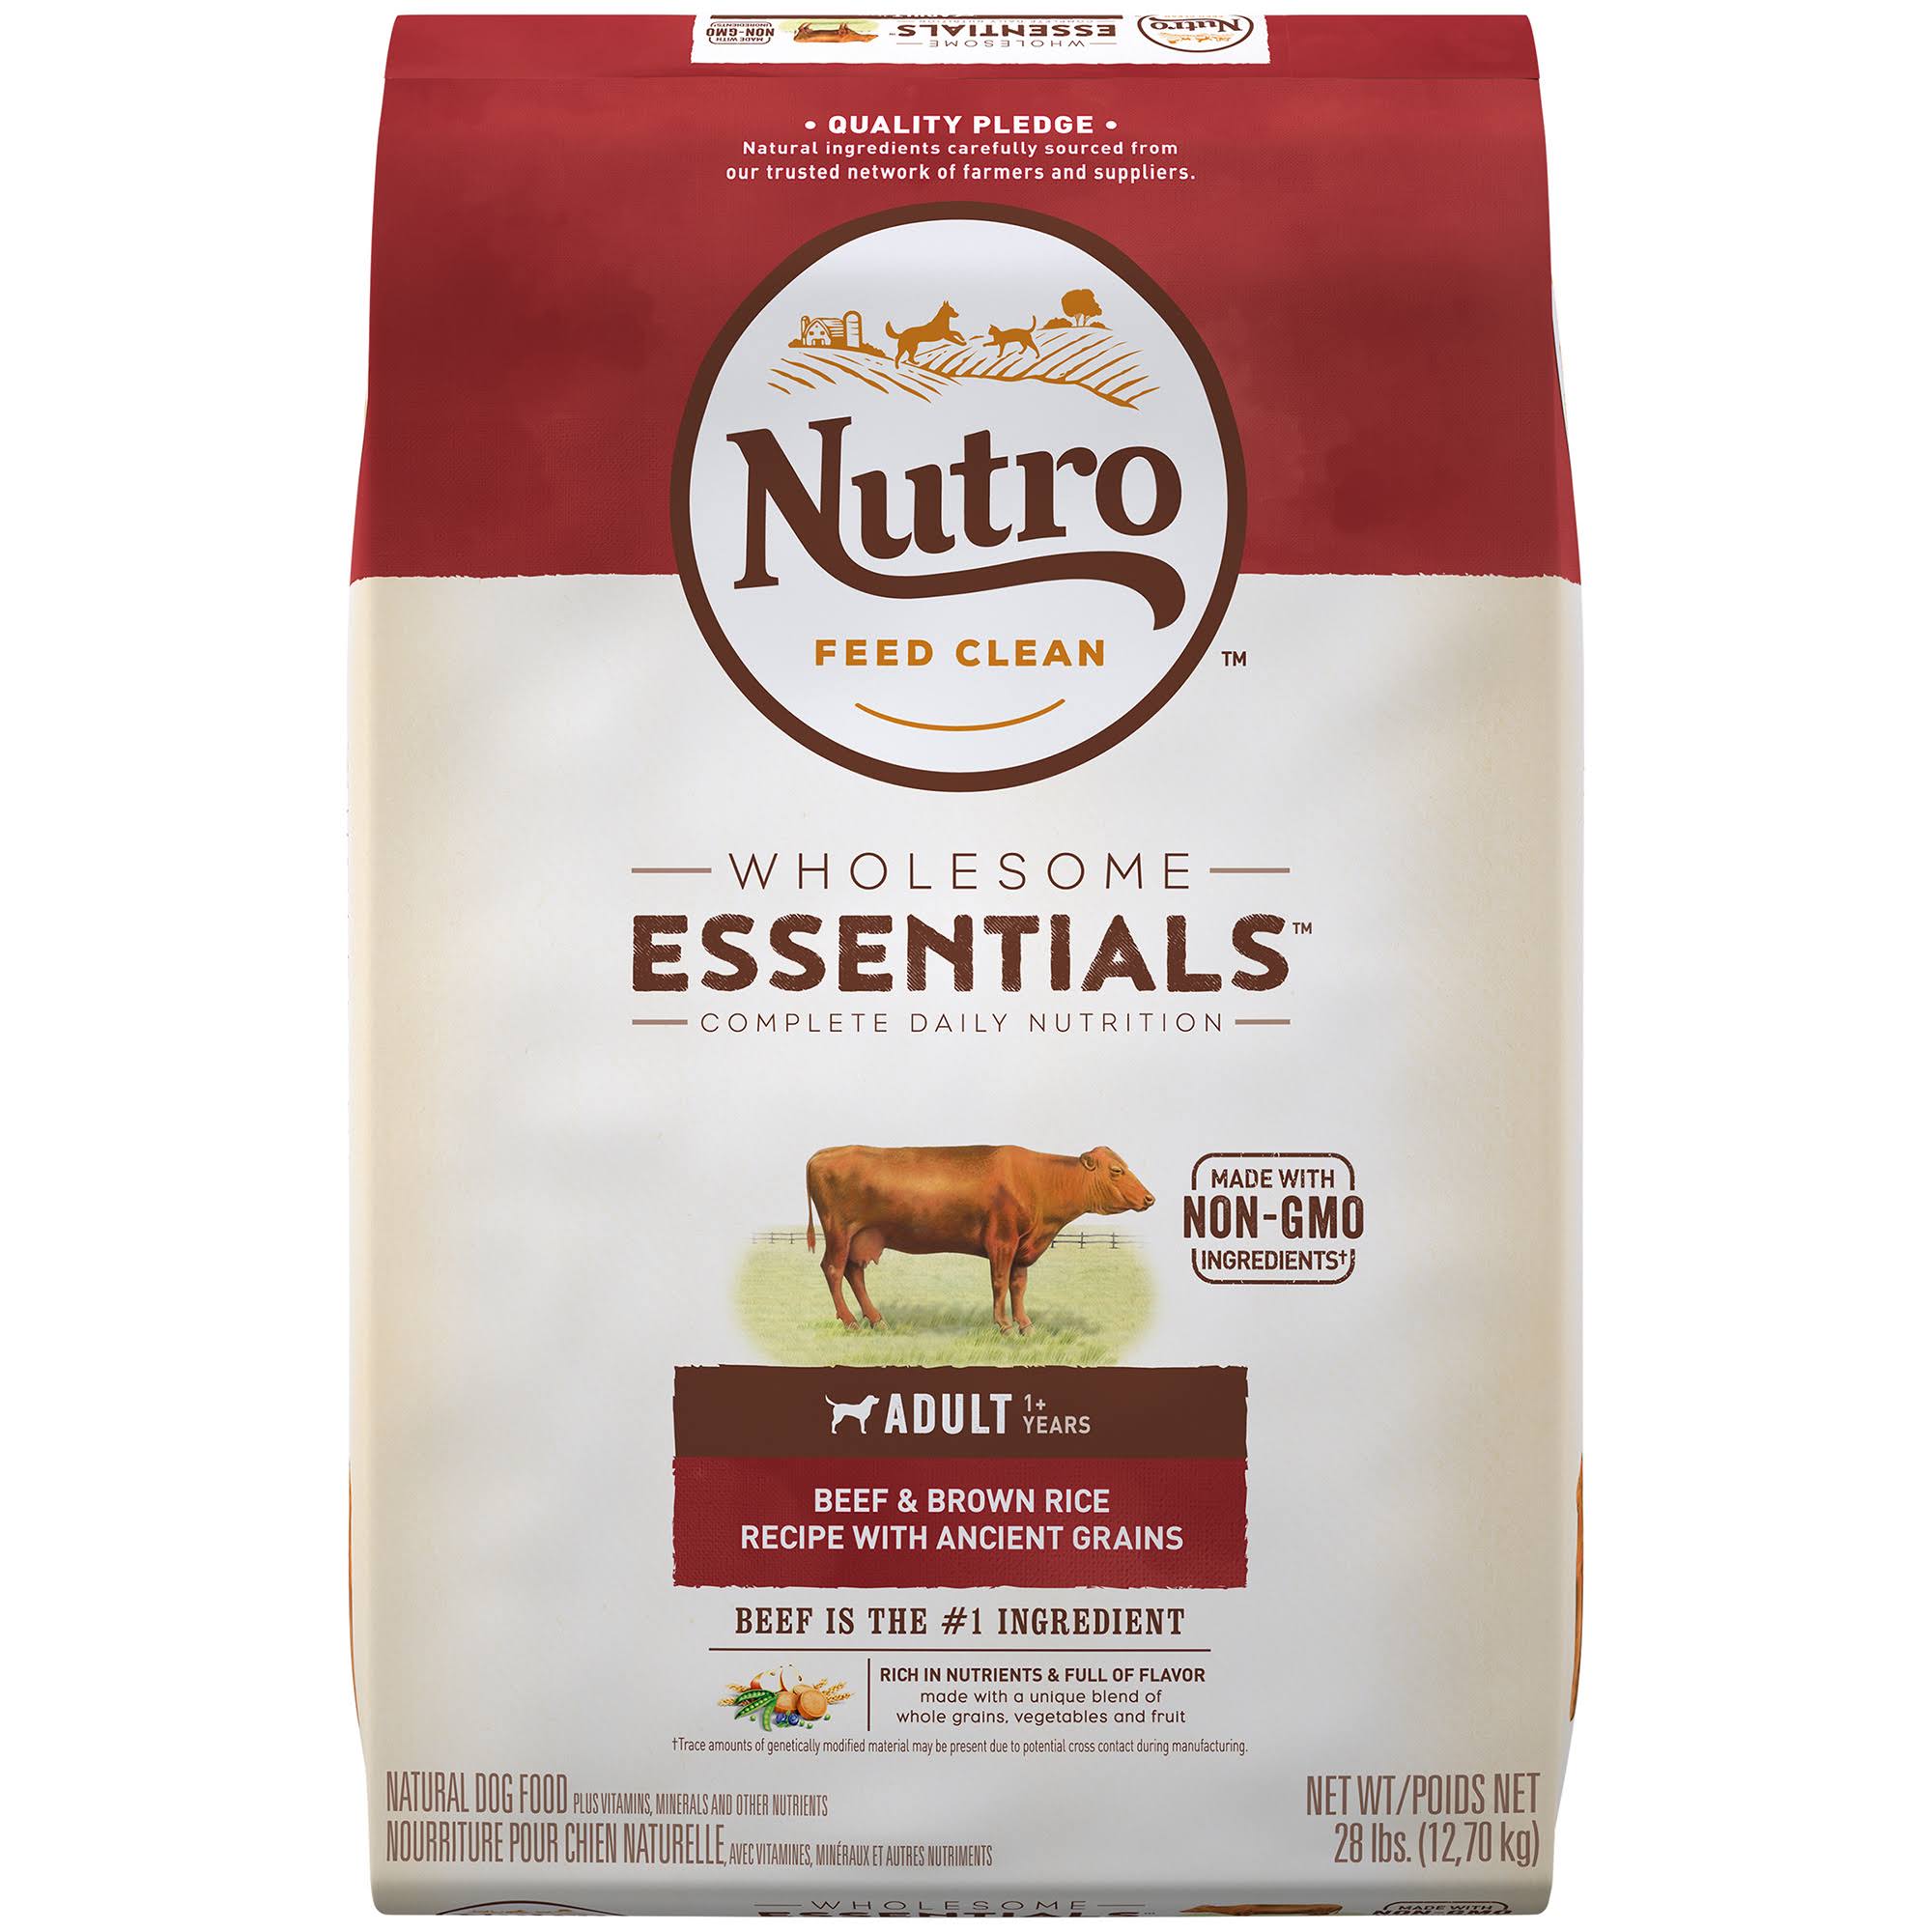 Nutro Wholesome Essentials Adult Dry Dog Food, Beef & Brown Rice Recipe with Ancient Grains, 13kg. Bag | General | Delivery Guaranteed